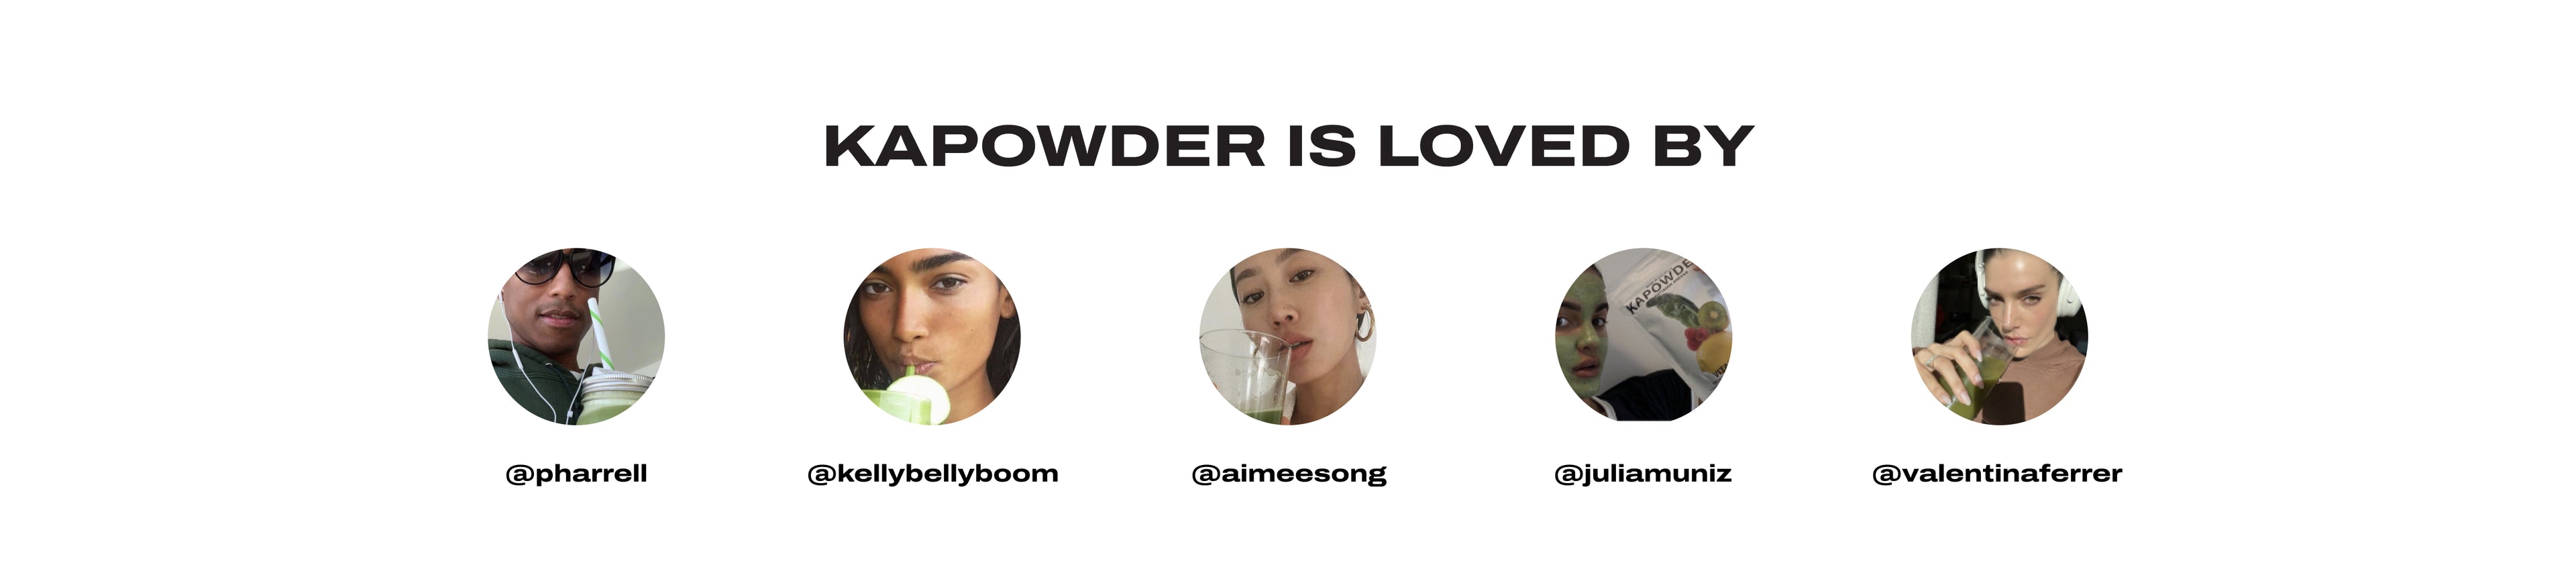 KAPOWDER is loved by @pharrell, @kellybellyboom, @aimeesong, @juliamuniz and @valentinaferrer